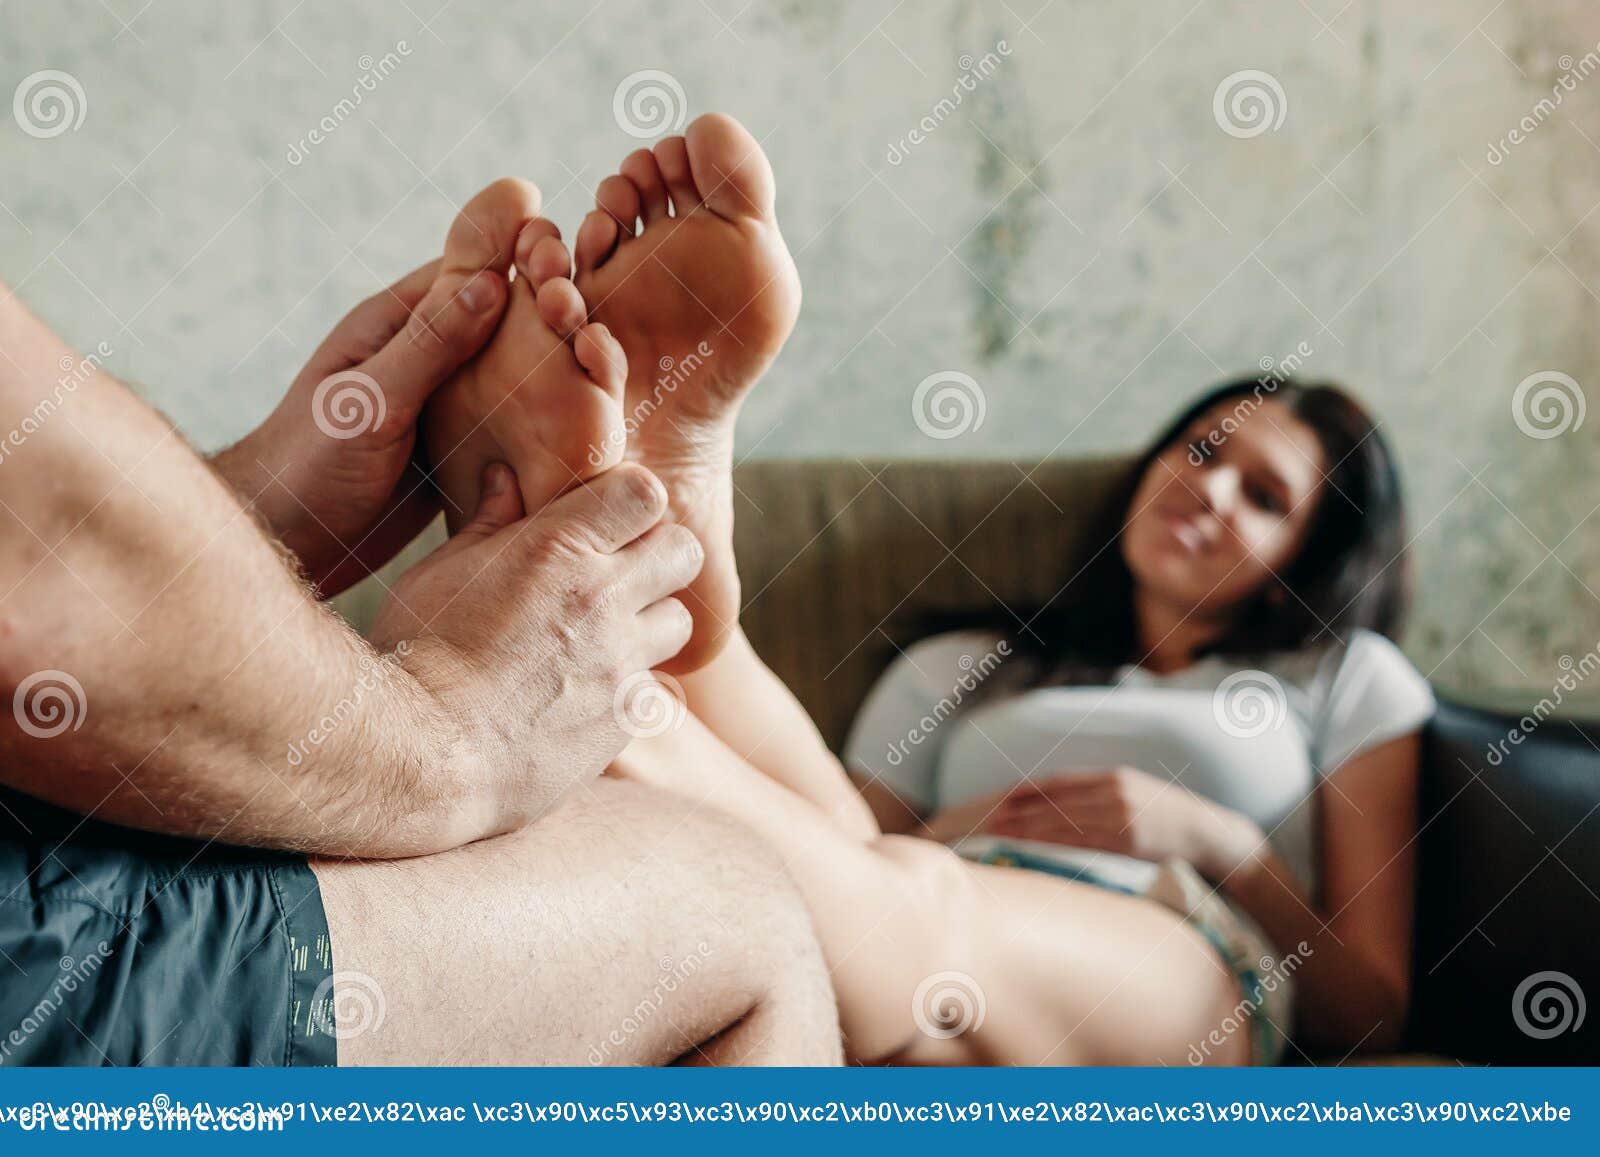 Wife Feet Pictures